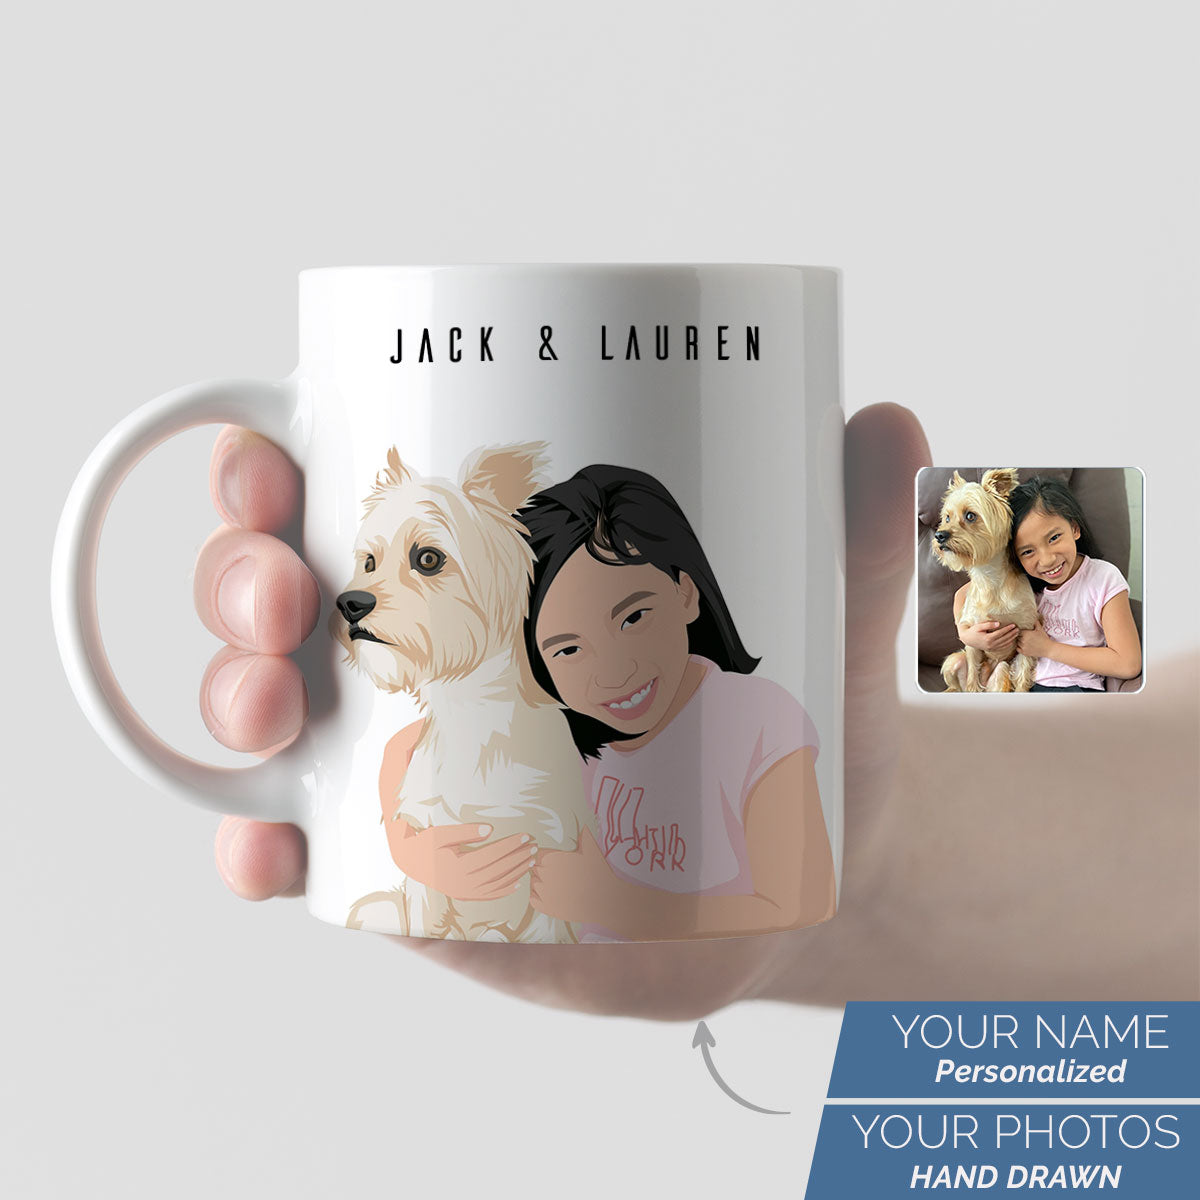 Personalized Dog and Owner Mug - Custom Artwork from Your Photo